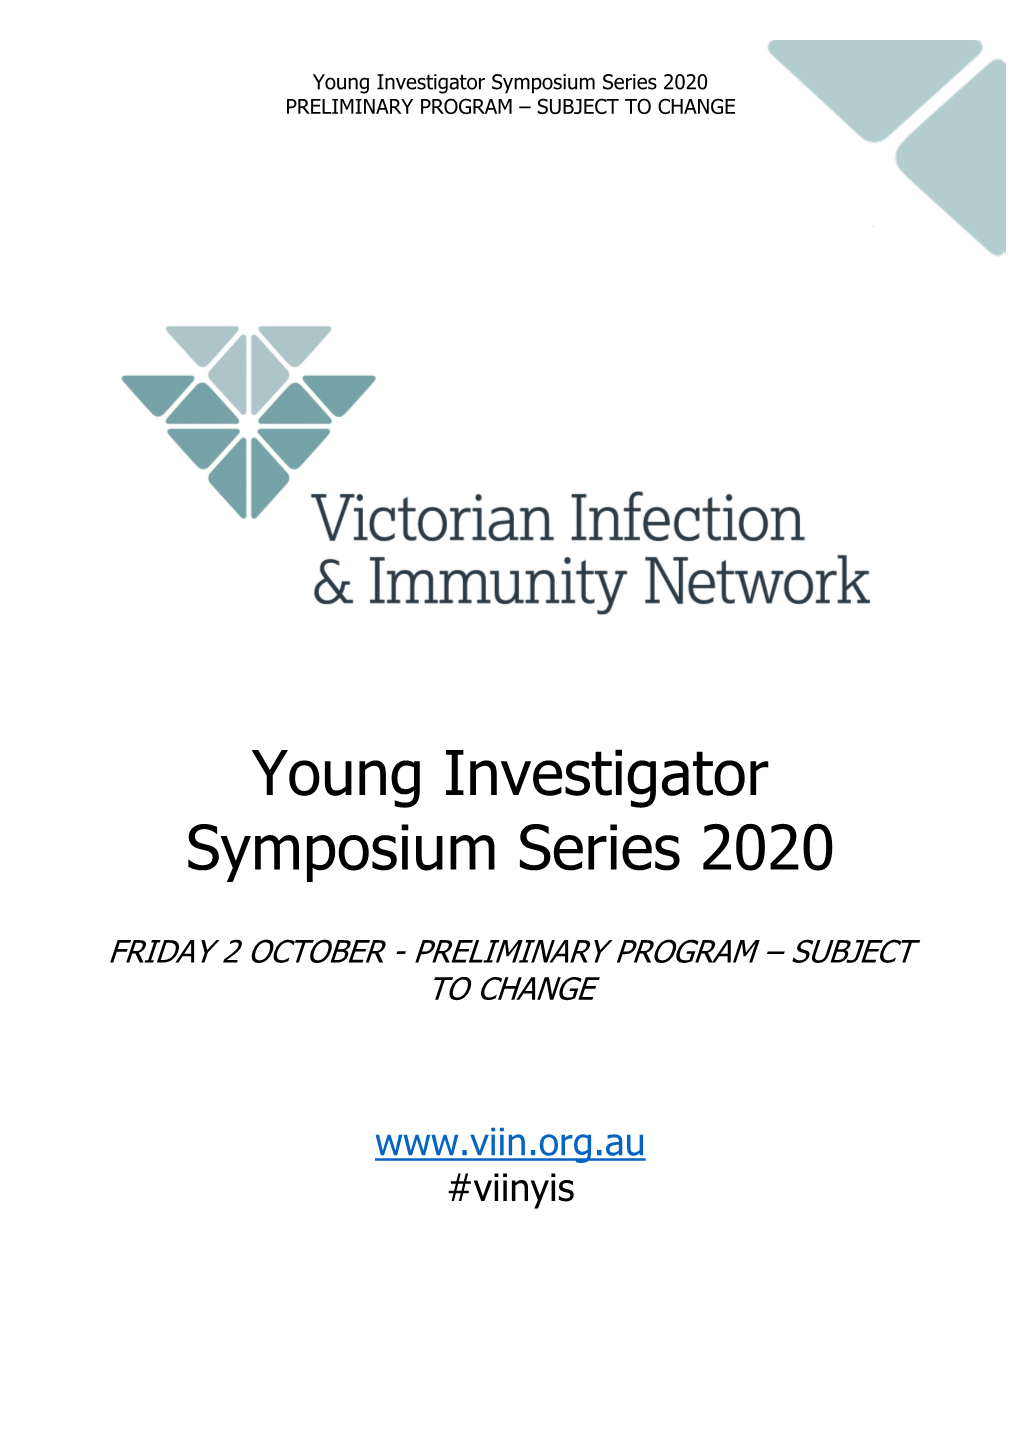 Young Investigator Symposium Series 2020 PRELIMINARY PROGRAM – SUBJECT to CHANGE